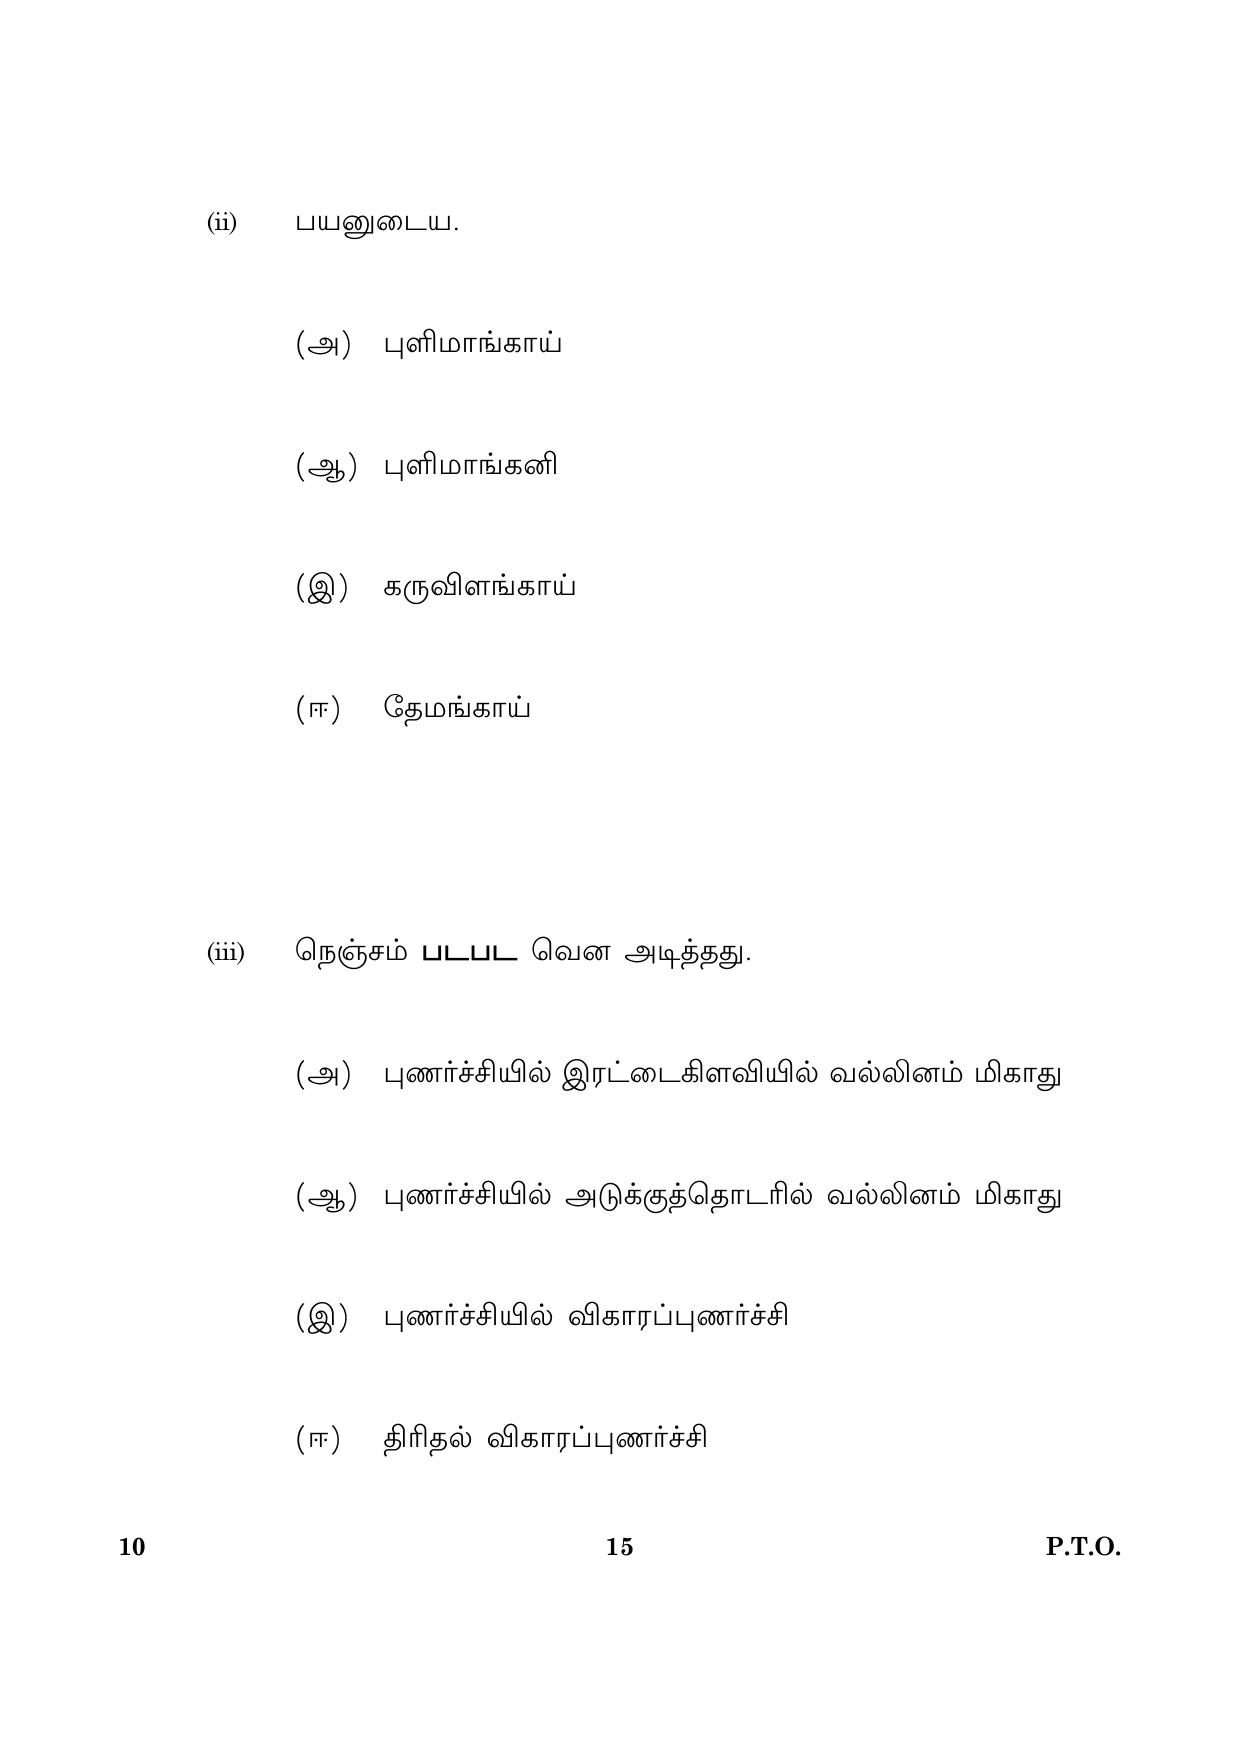 CBSE Class 10 010 Tamil 2016 Question Paper - Page 15